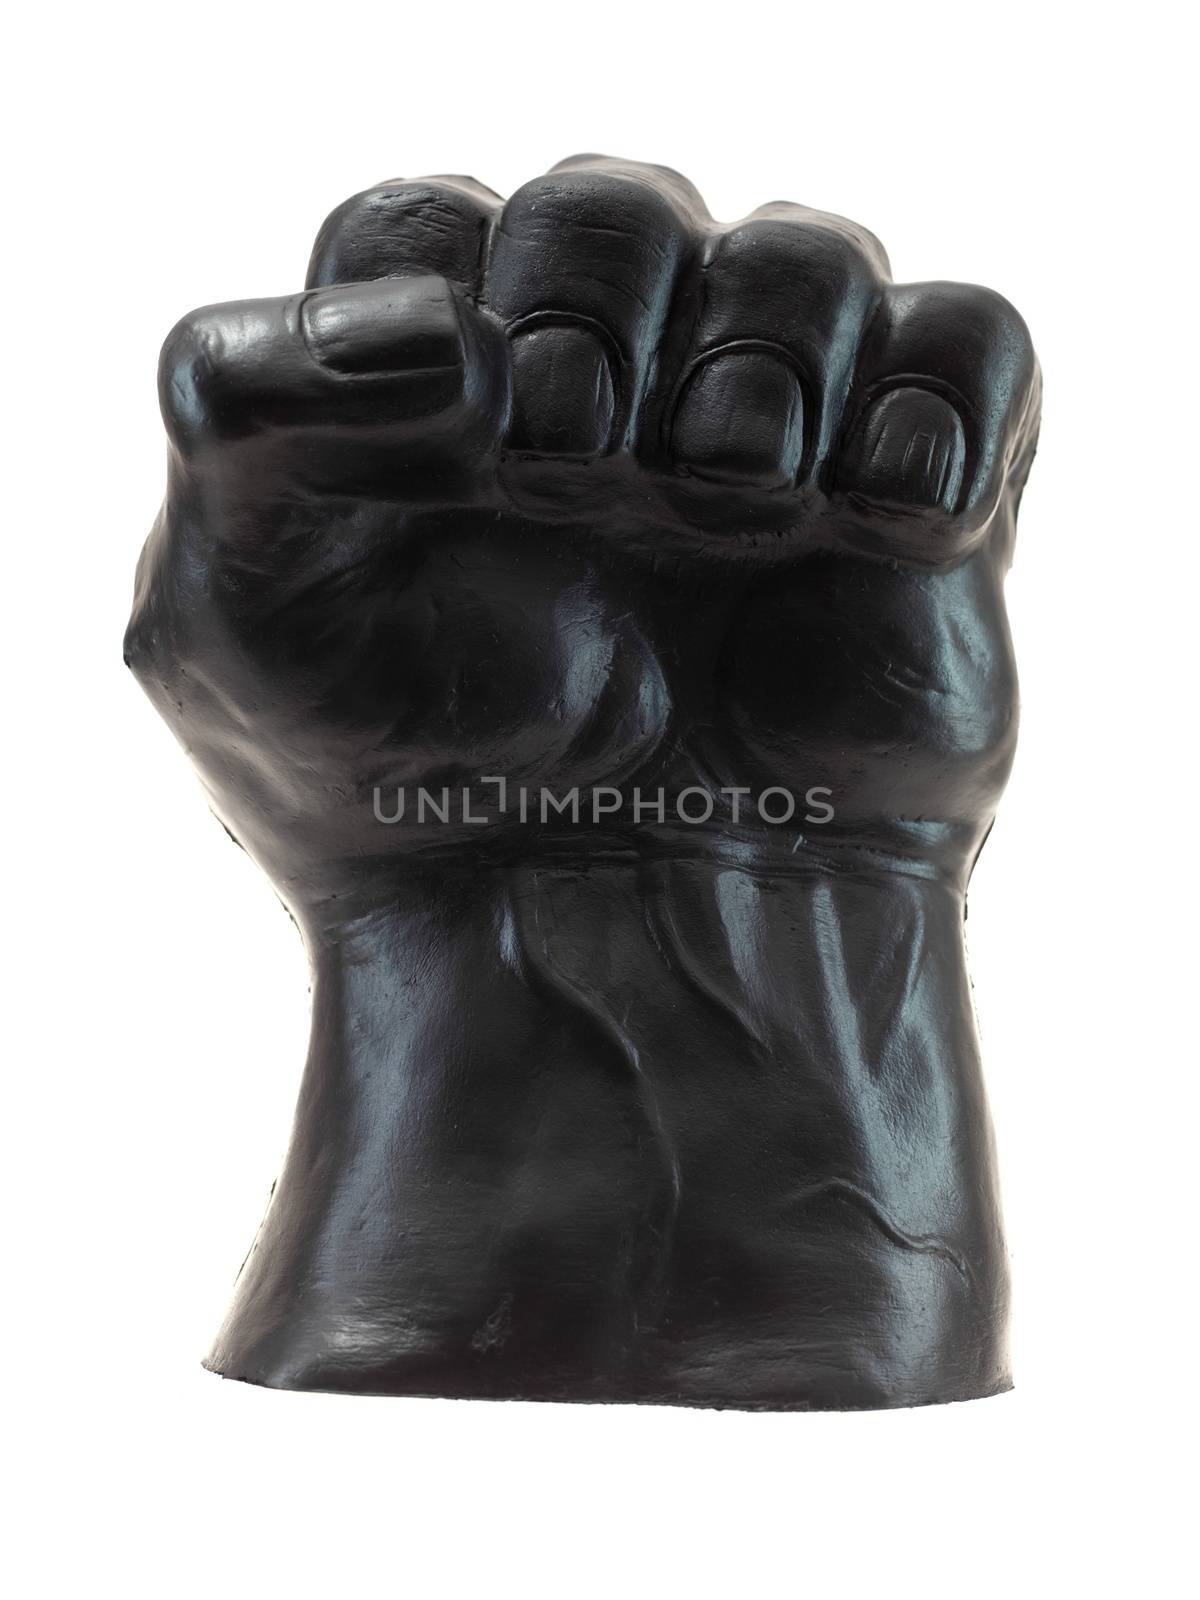 A clenched fist isolated against a white background